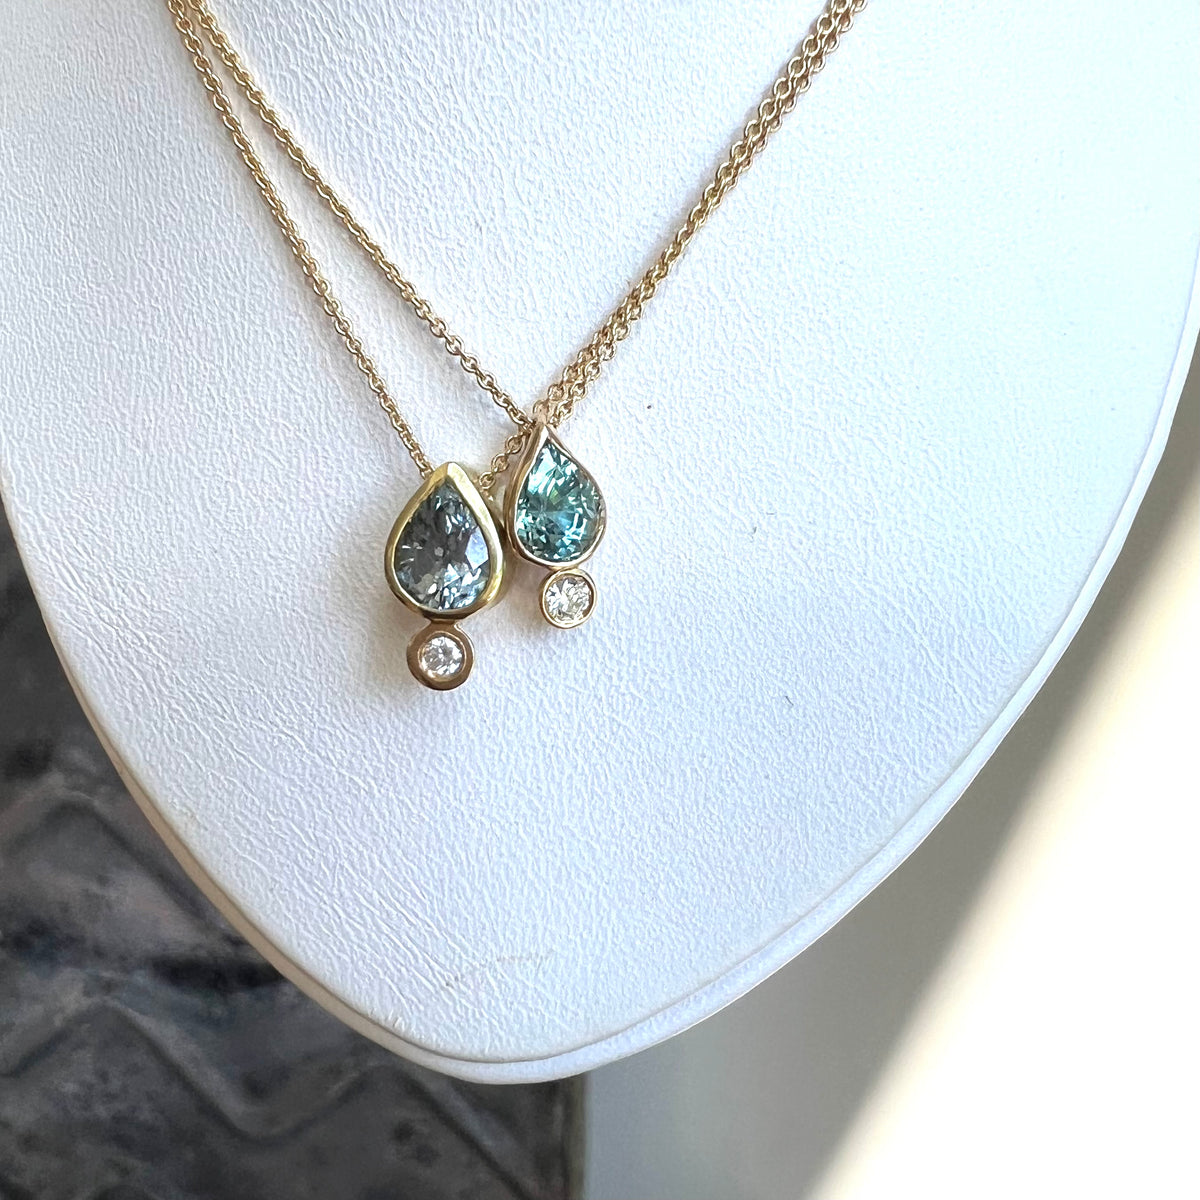 TEAL BLUE SAPPHIRE SACRED SEED NECKLACE